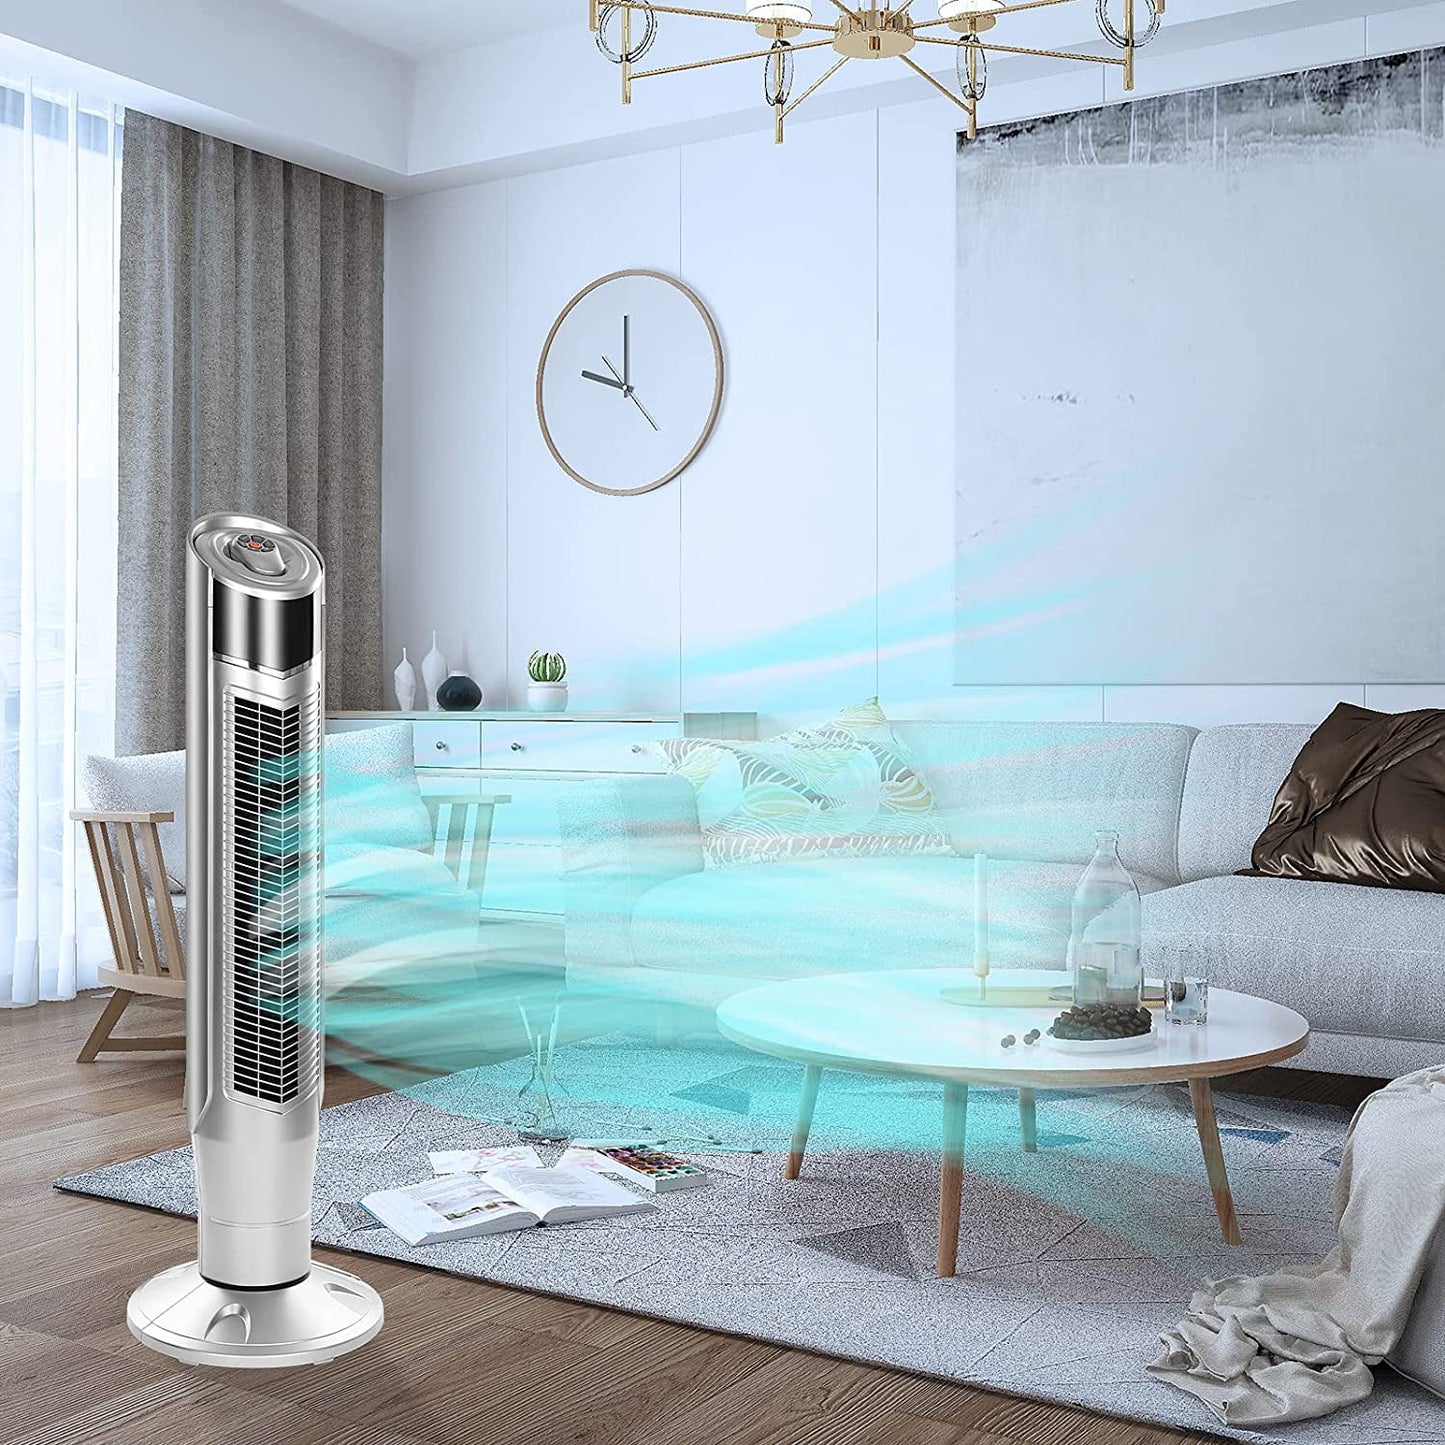 Auseo Tower Fan, Standing Fan Oscillating, Room Fan, Portable Bladeless, Quiet Floor Fan with Remote, 6 Speeds, 3 Modes, 24H Timer for Bedroom, and Home Office Use, (40-inch, SILVER)